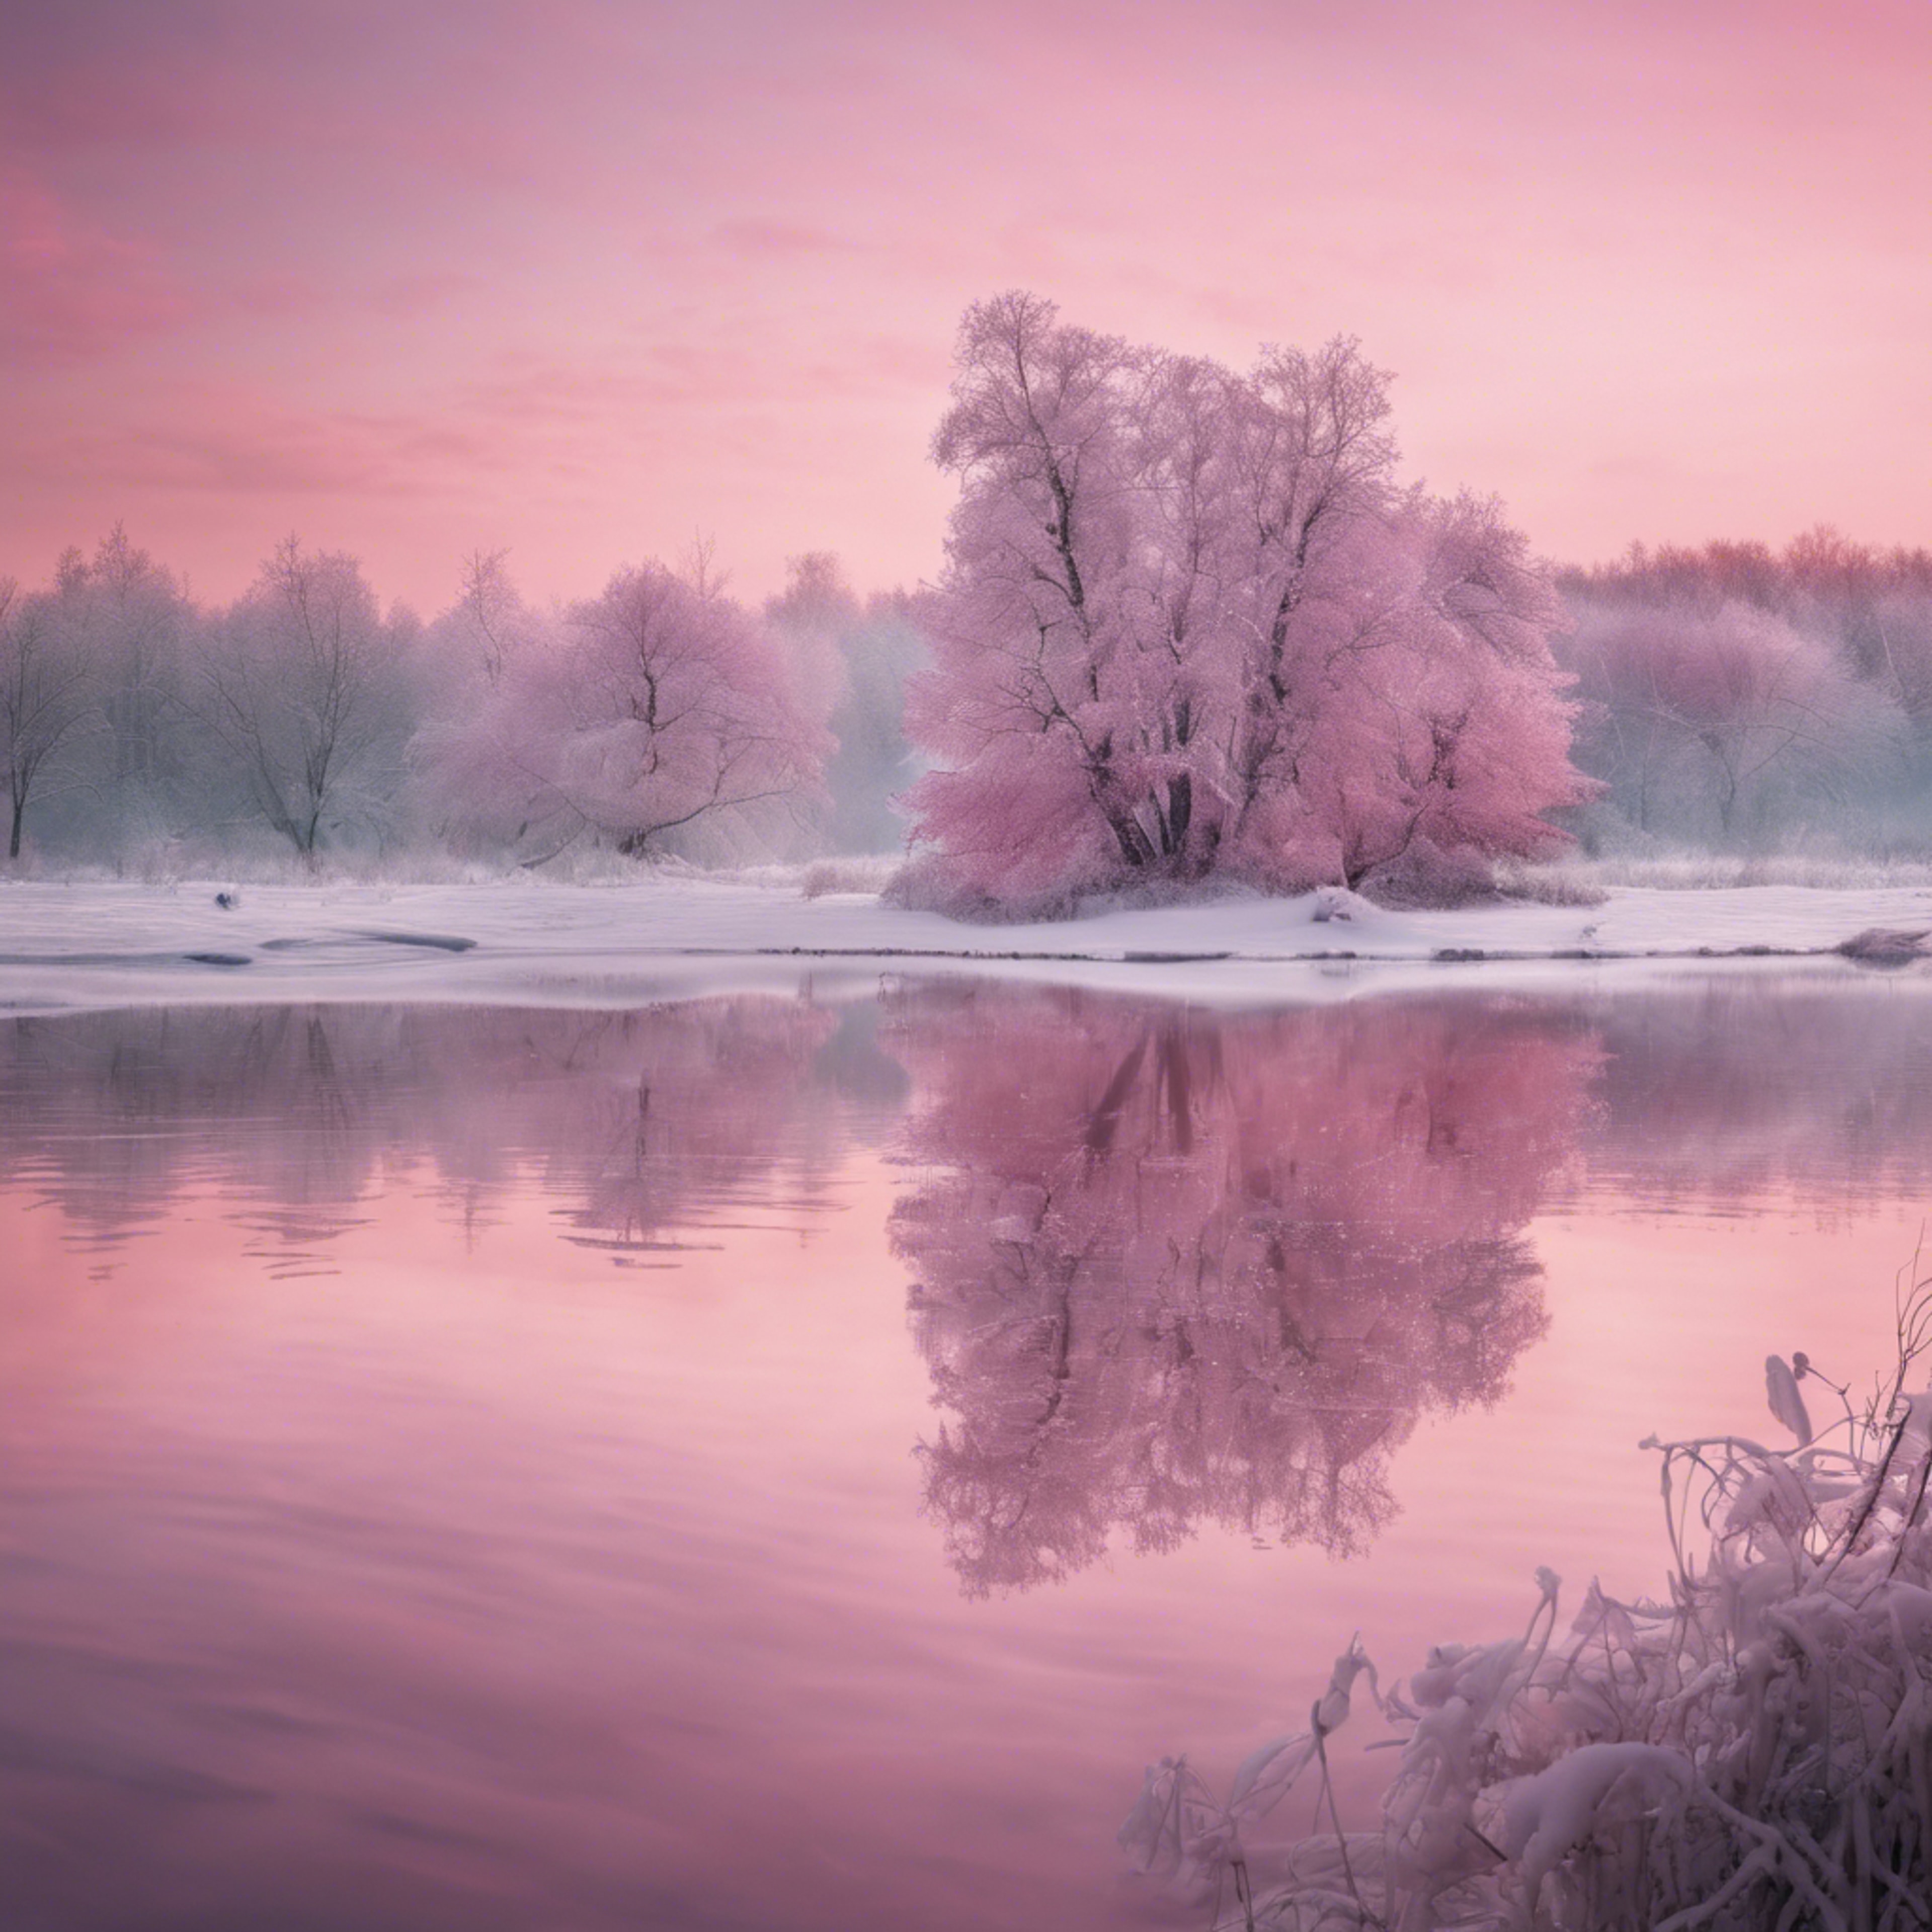 A tranquil pink Christmas morning landscape, reflections on a still frozen lake.壁紙[99be3b4566ac4908b7ca]